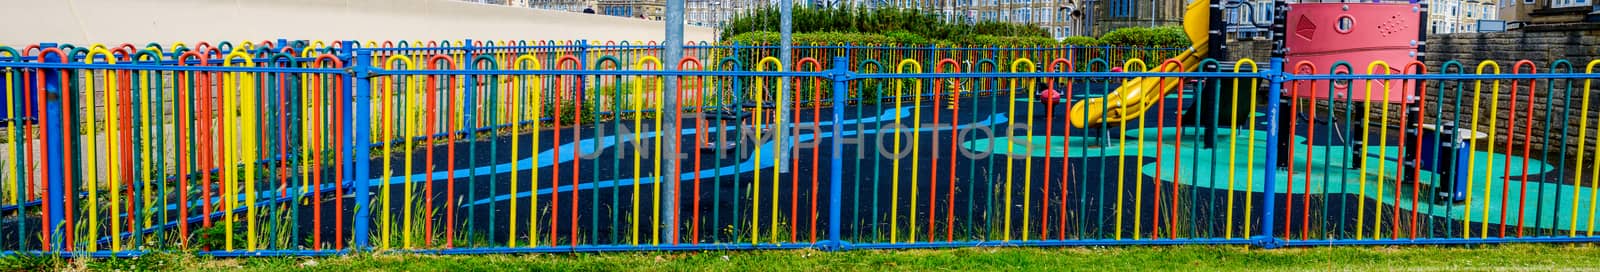 Panorama of a Colorful garden fence with playground int the background by paddythegolfer